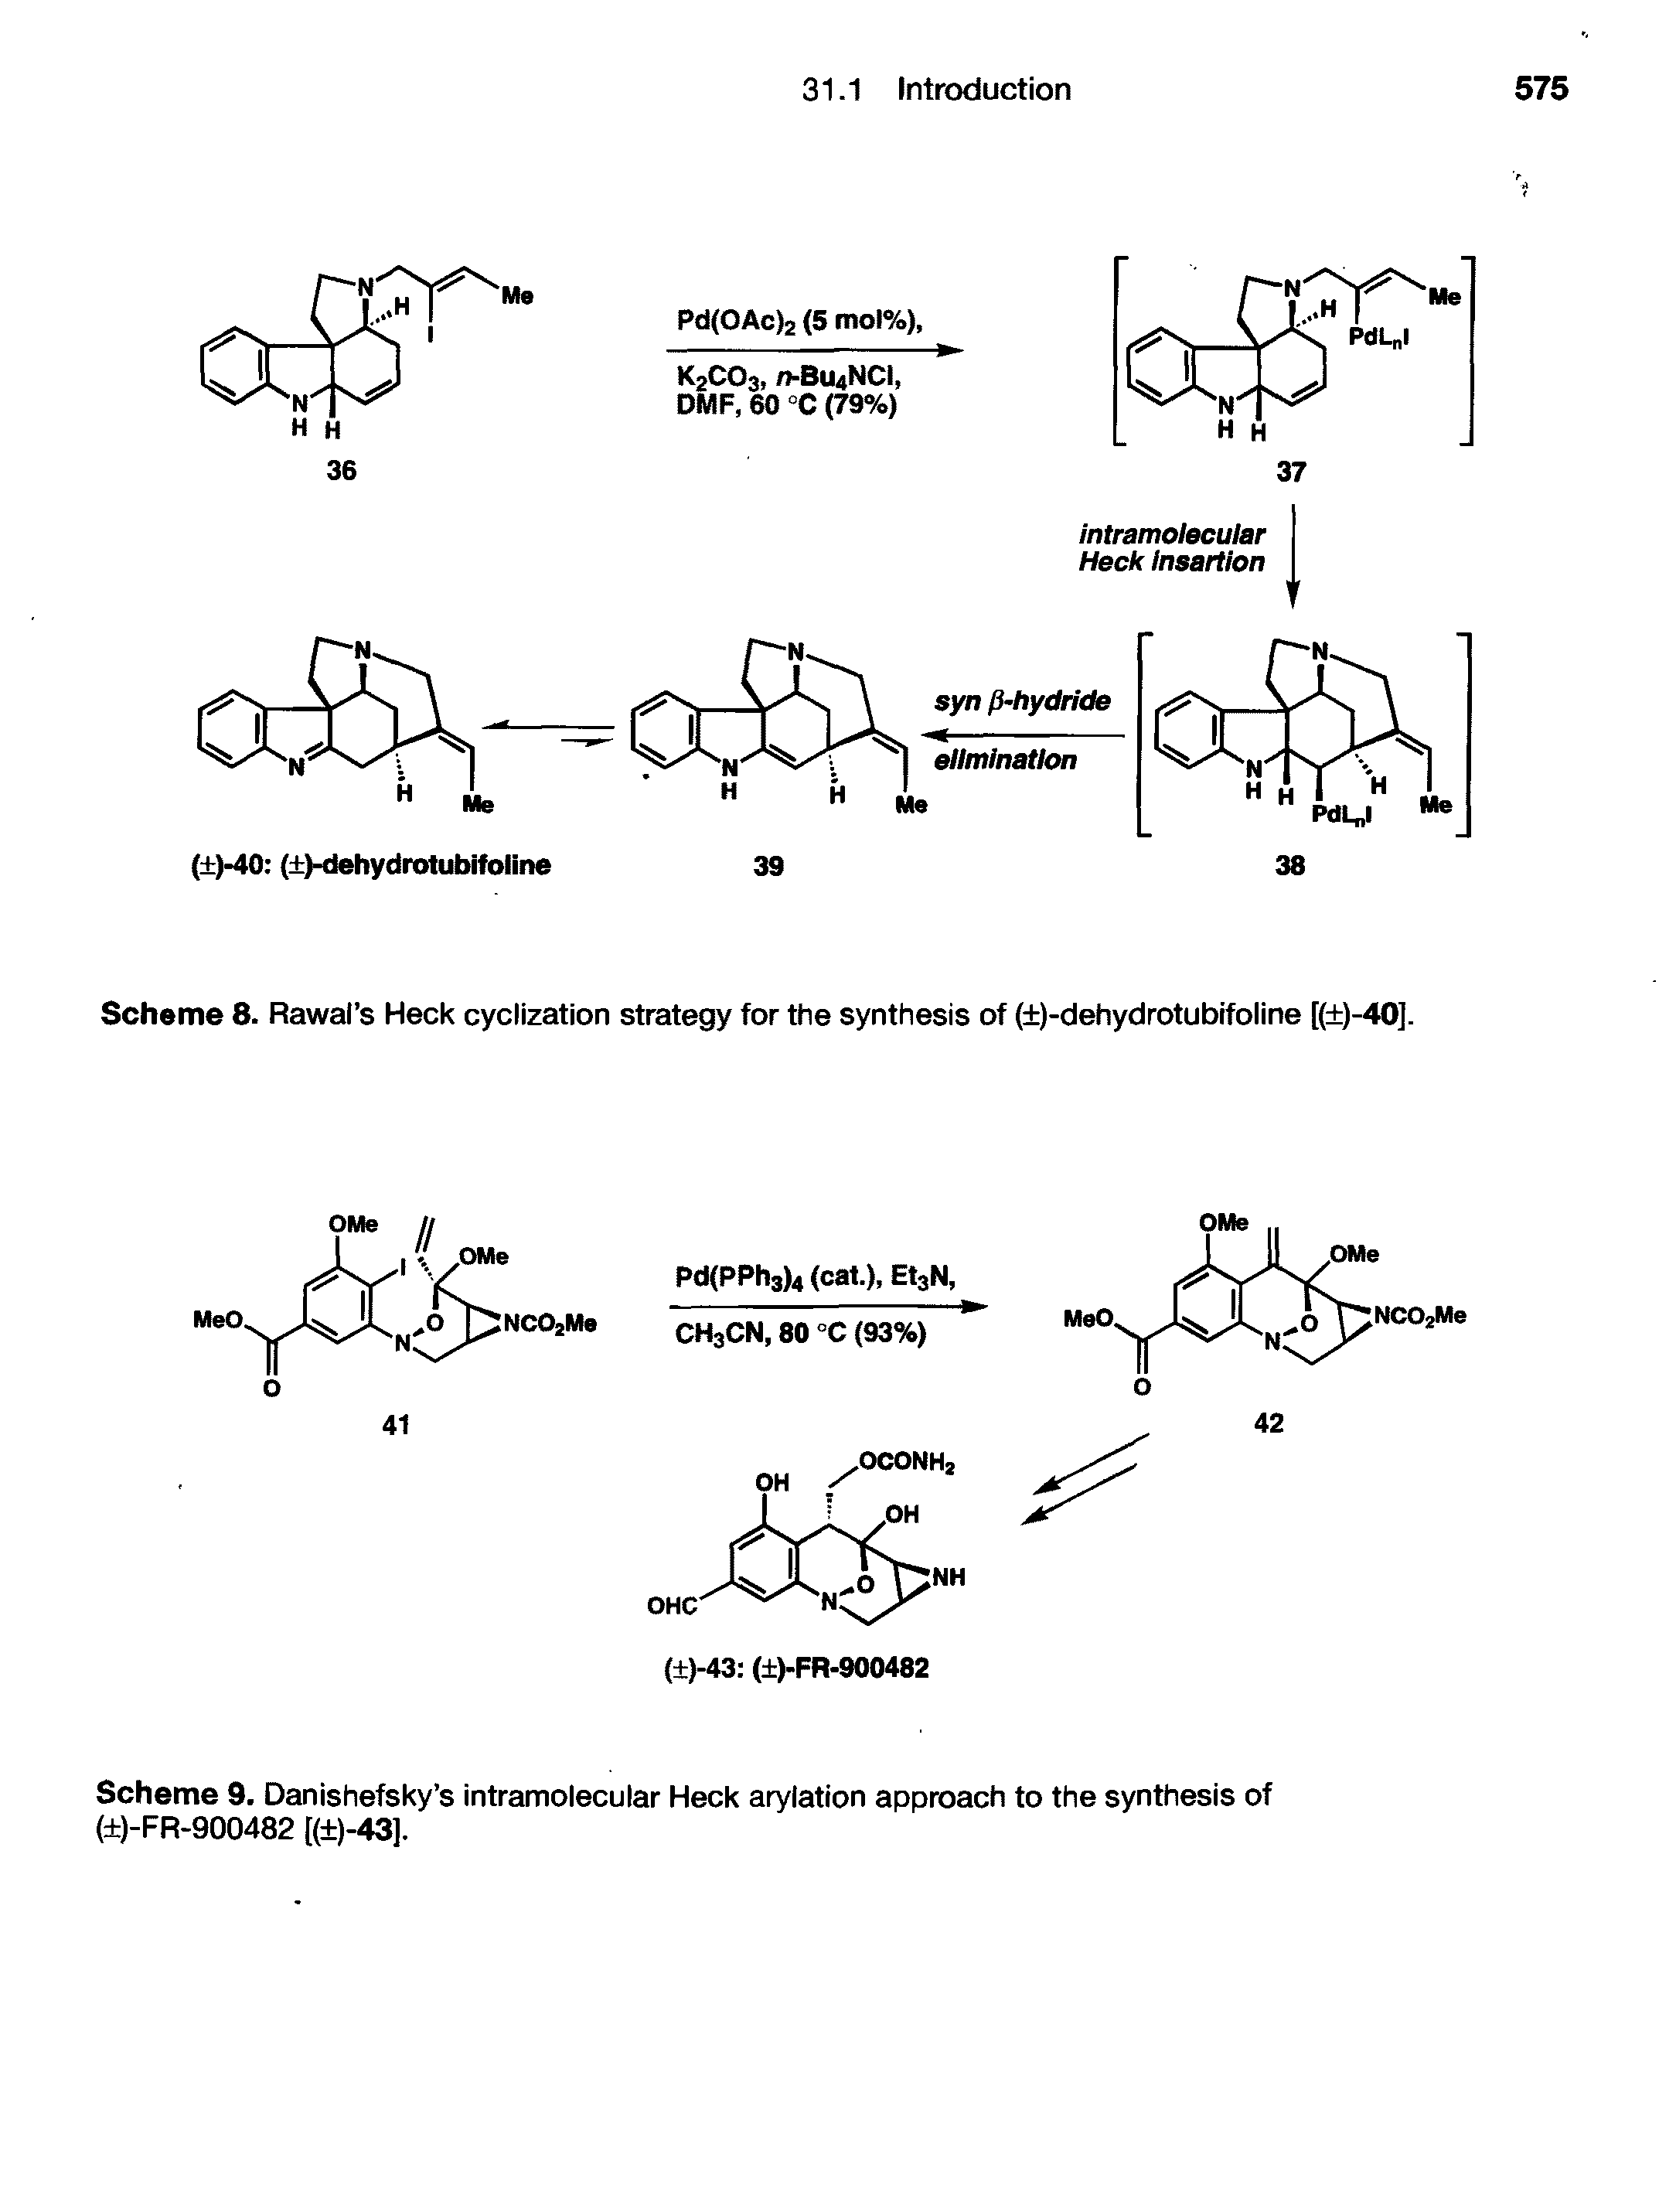 Scheme 9. Danishefsky s intramolecular Heck arylation approach to the synthesis of ( )-FR-900482 [( )-43].